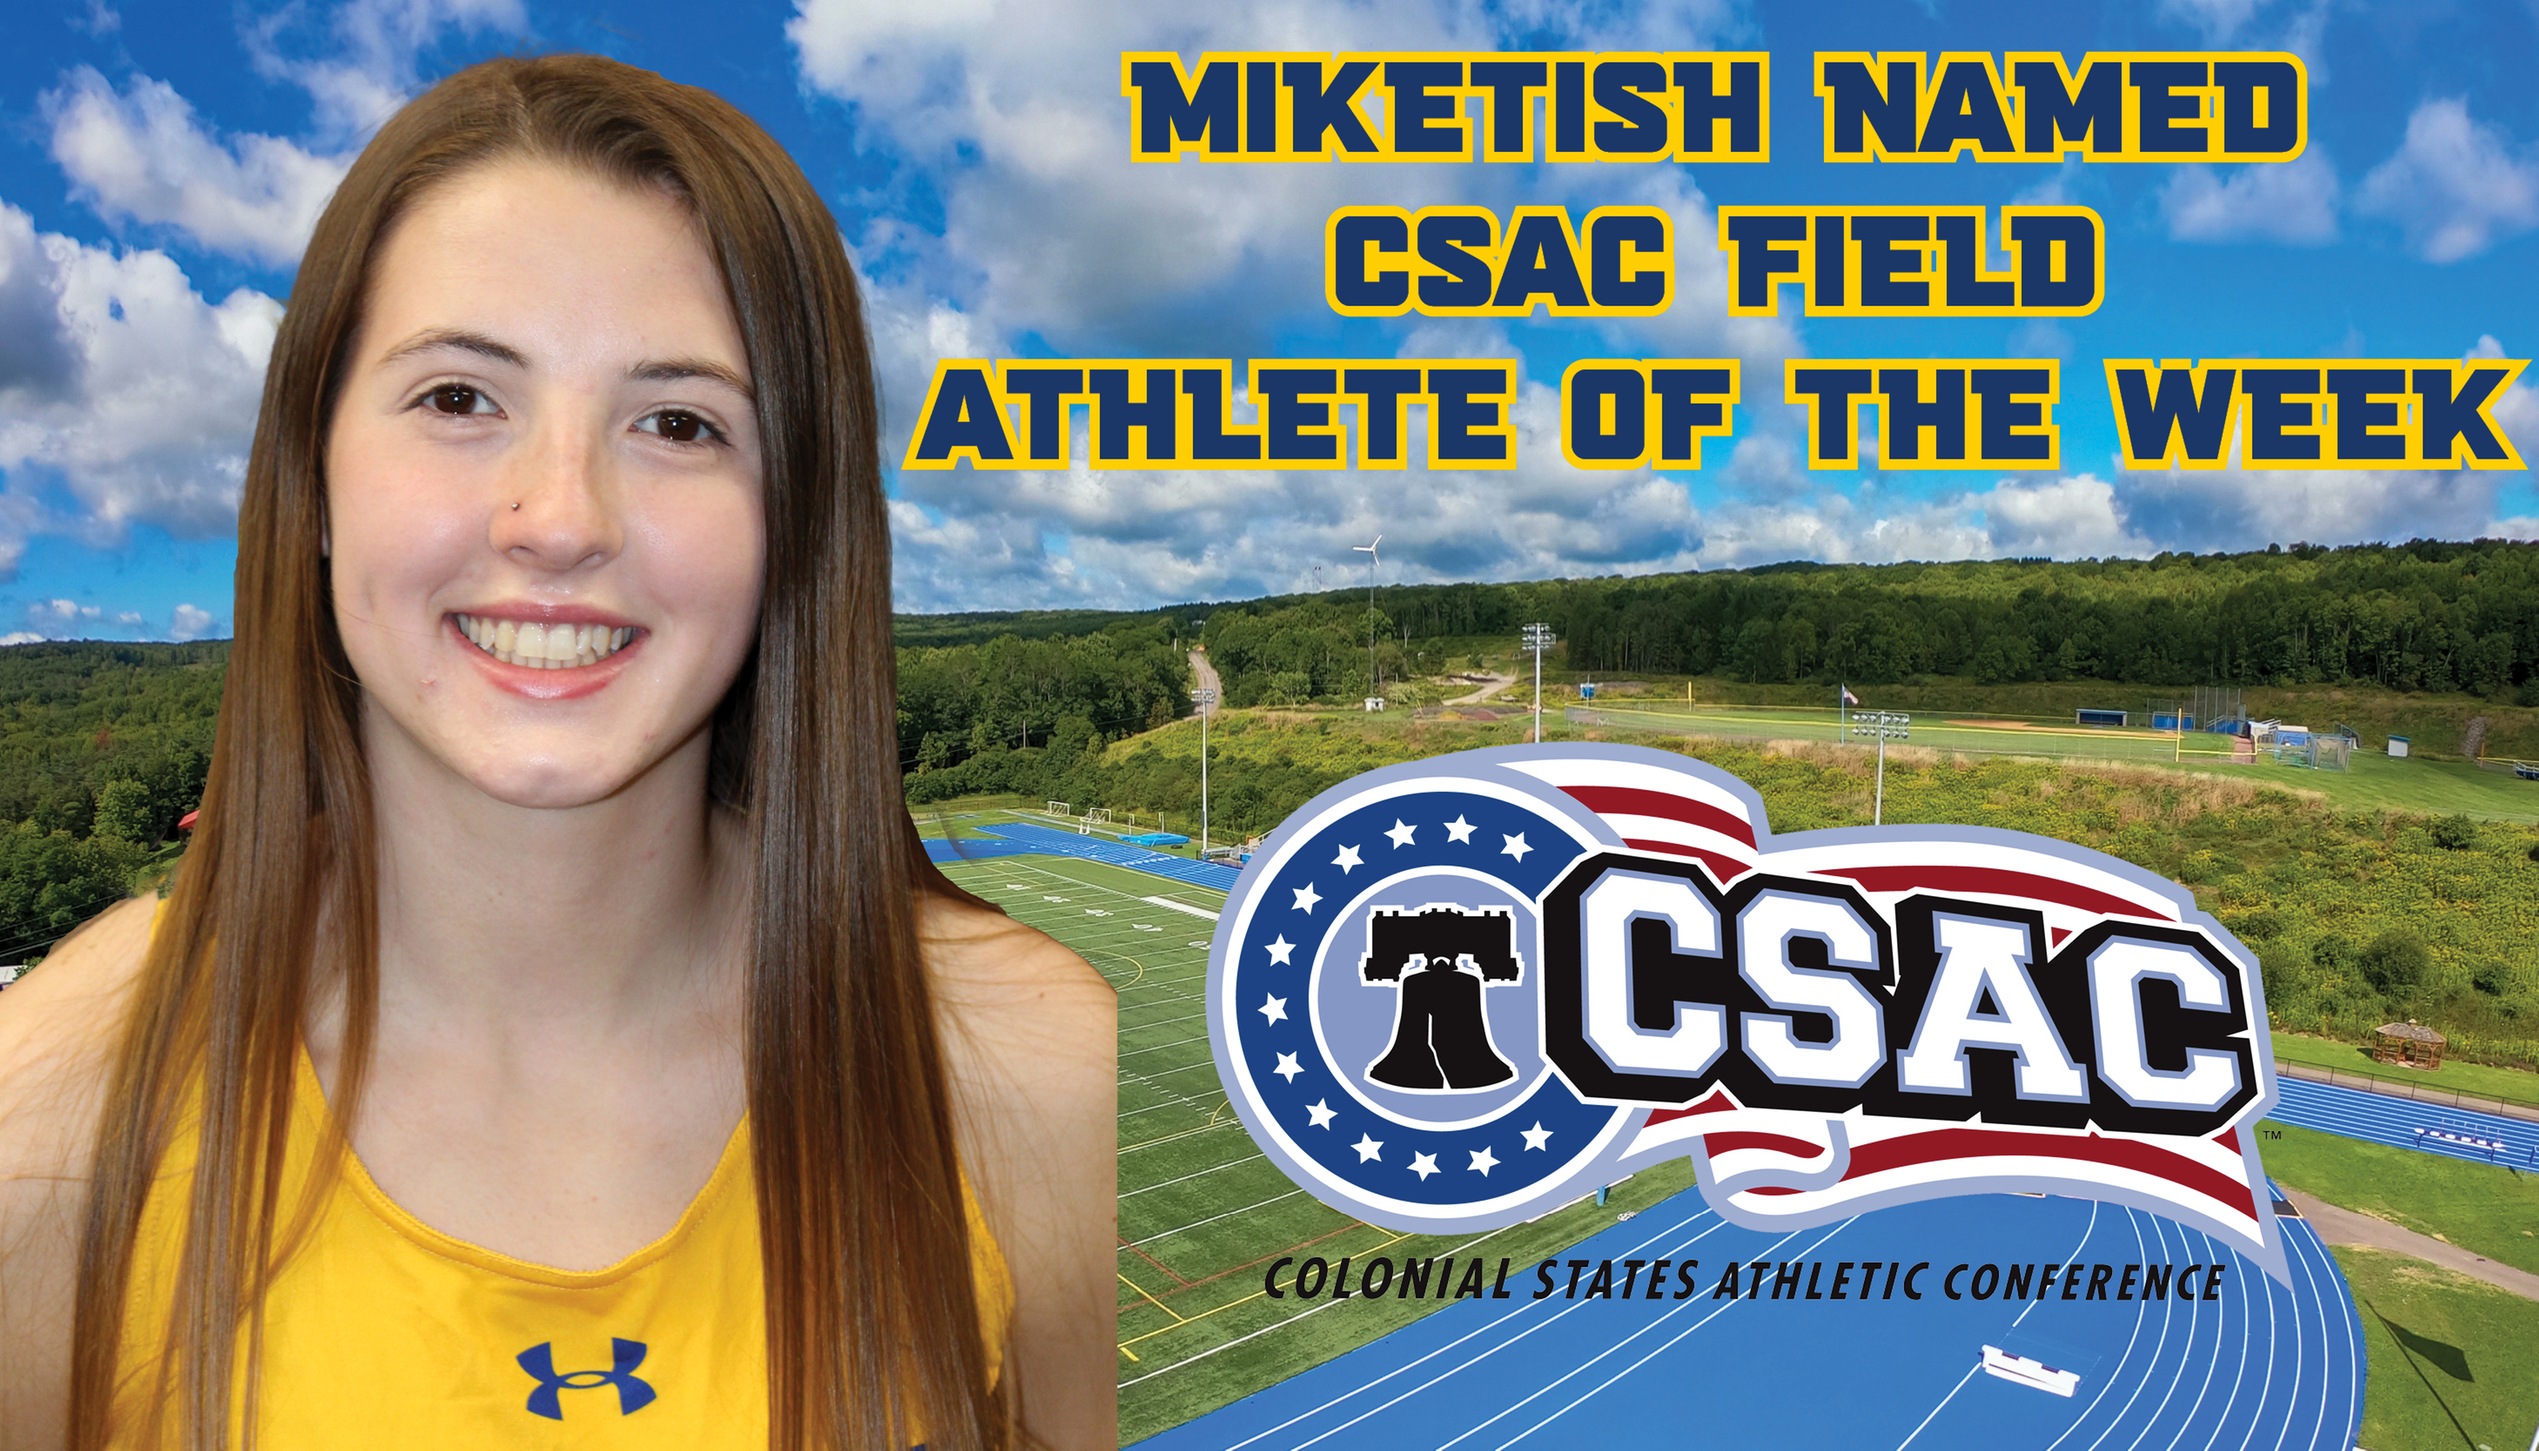 Miketish Named CSAC Field Athlete of the Week - picture features a headshot of Marina Miketish with a picture of Pioneer Stadium in the background.